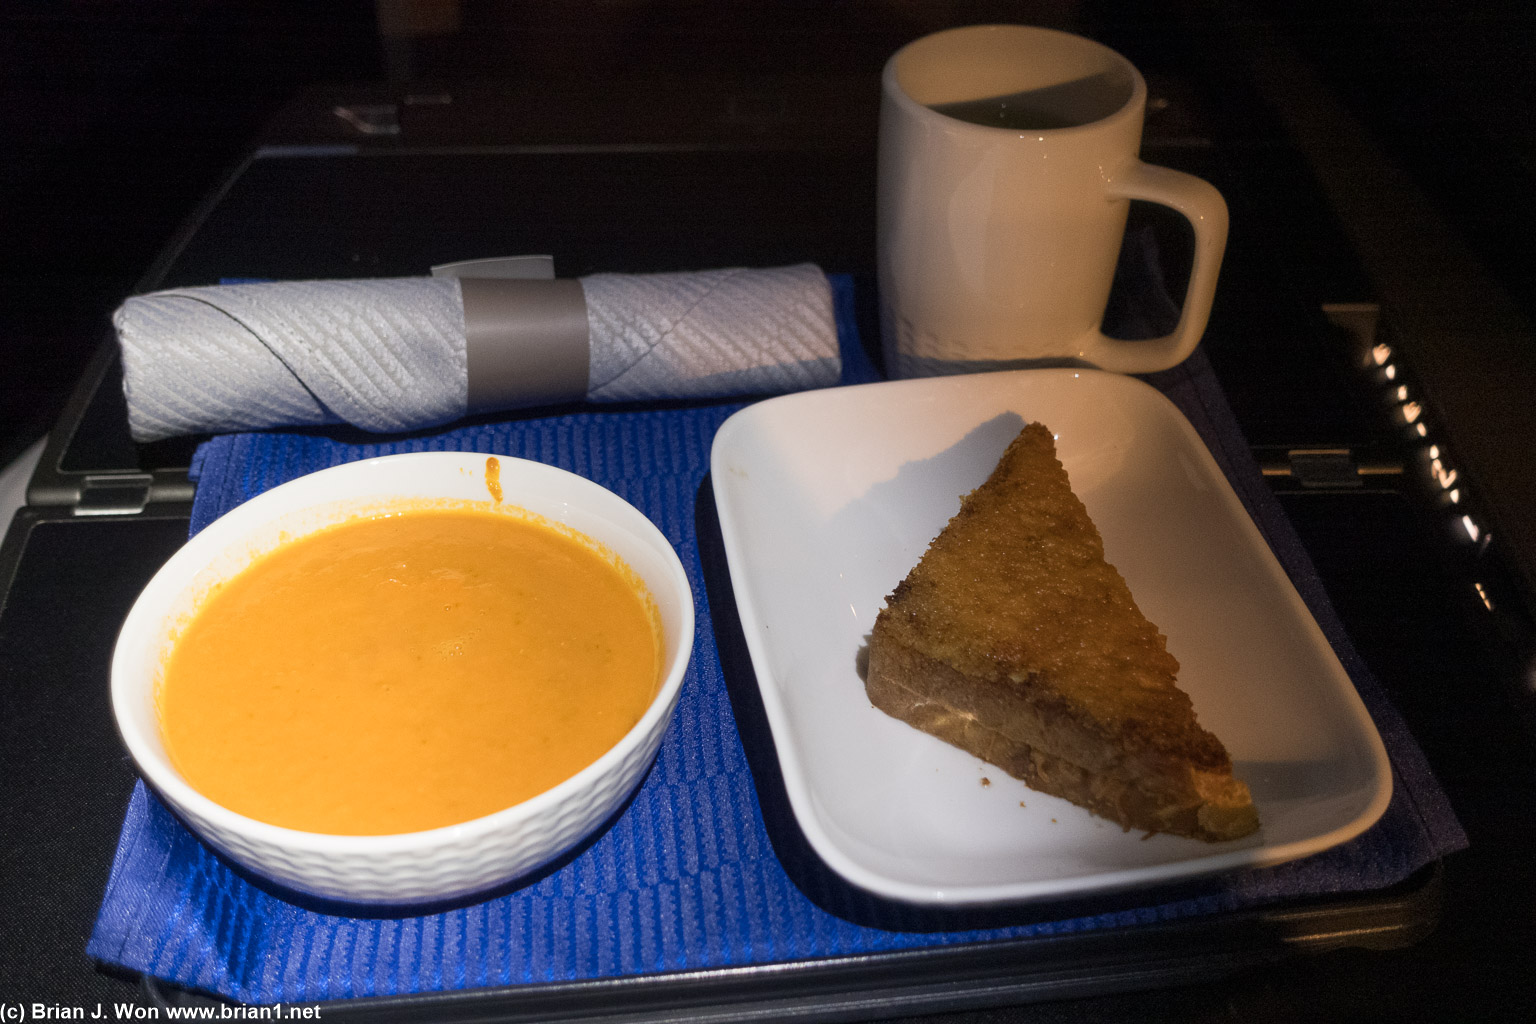 Grilled cheese and tomato soup are still crap.